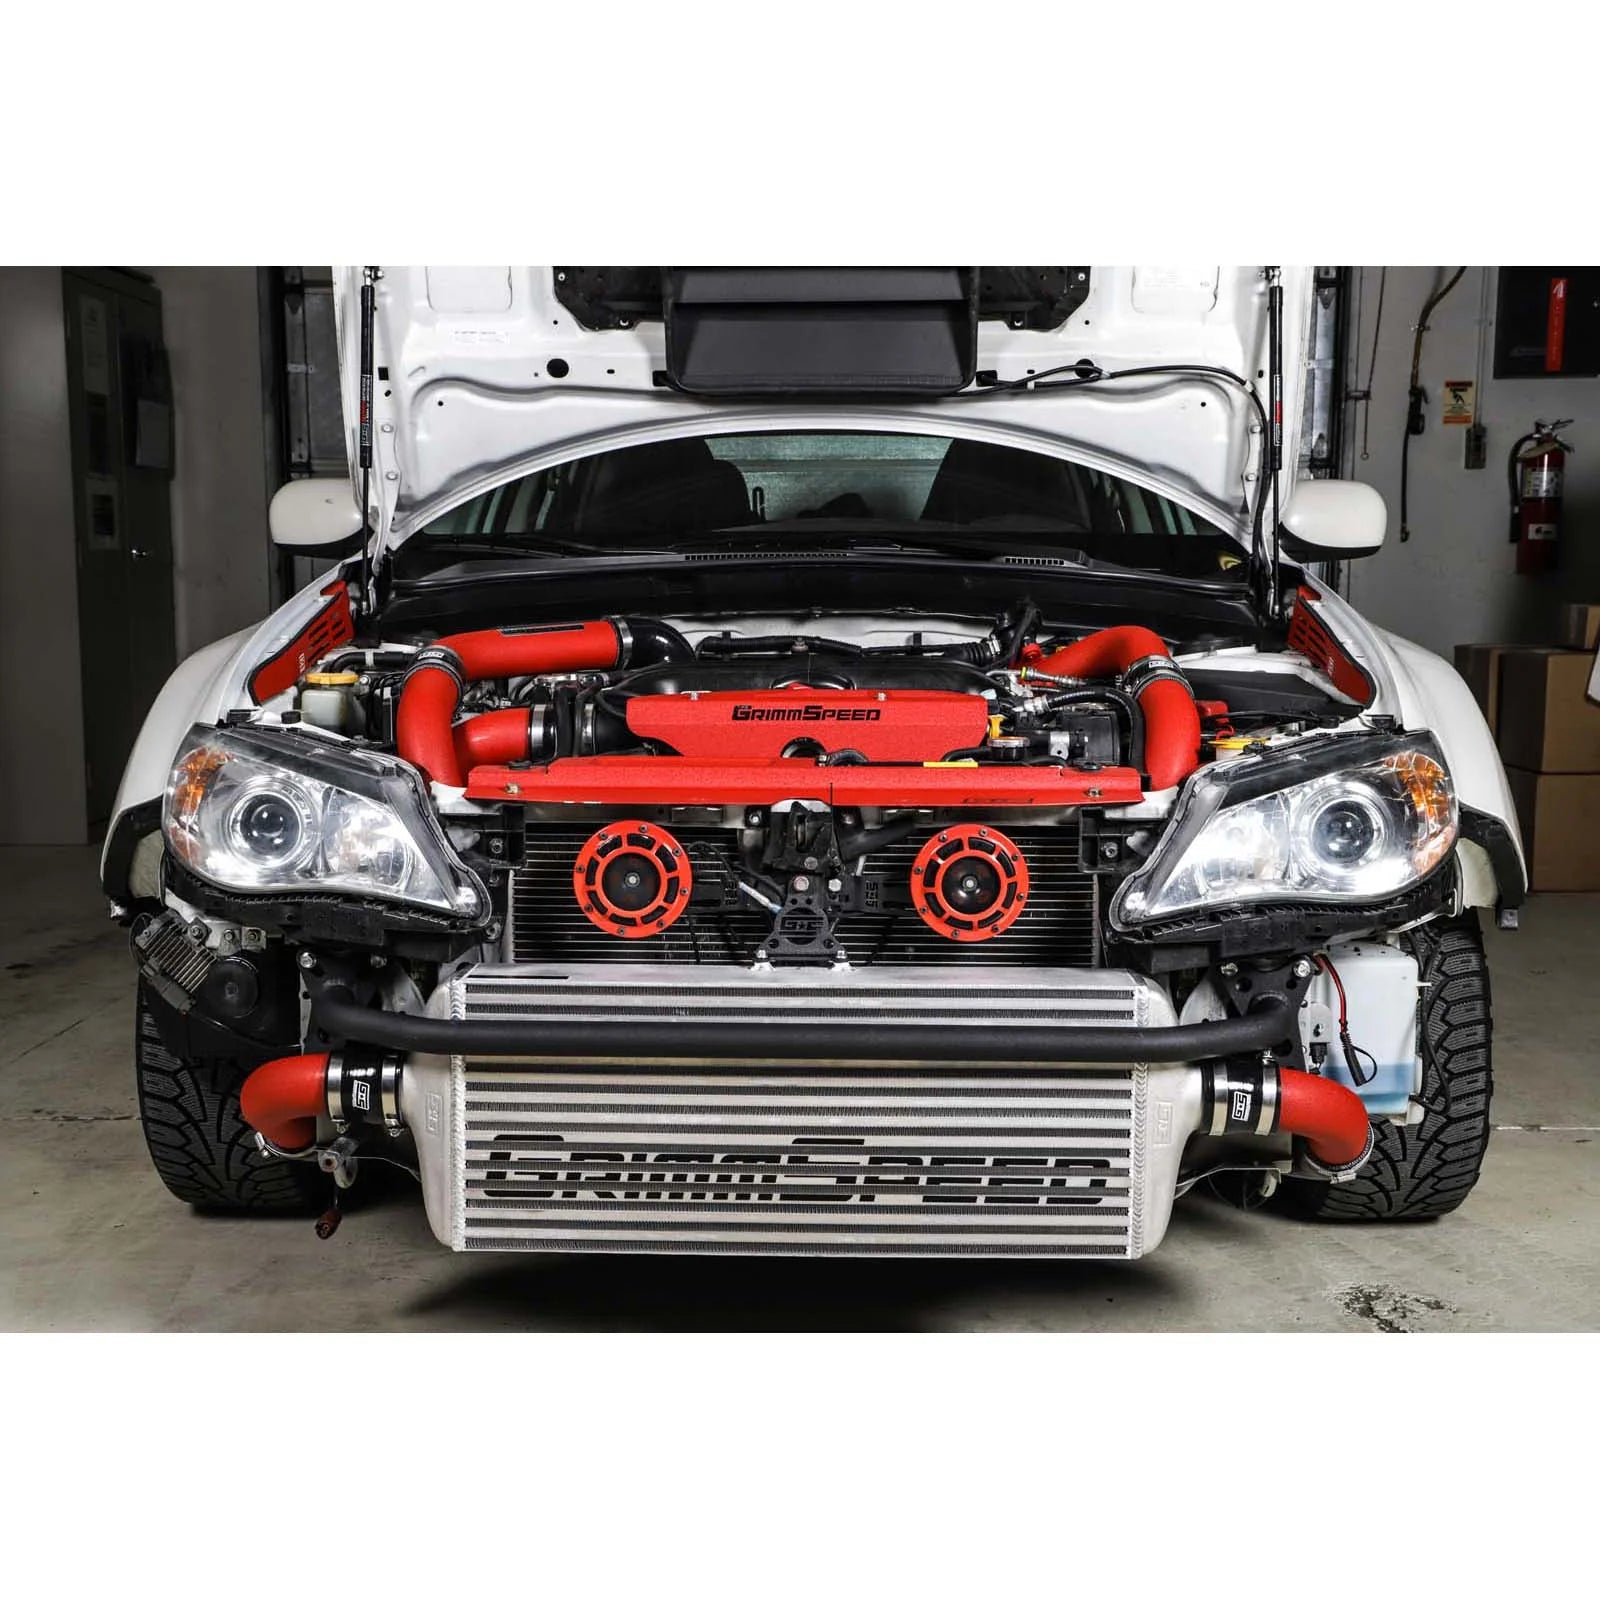 GrimmSpeed Front Mount Intercooler Kit - Raw Core with Red Piping - 2008-14 Subaru WRX - 0